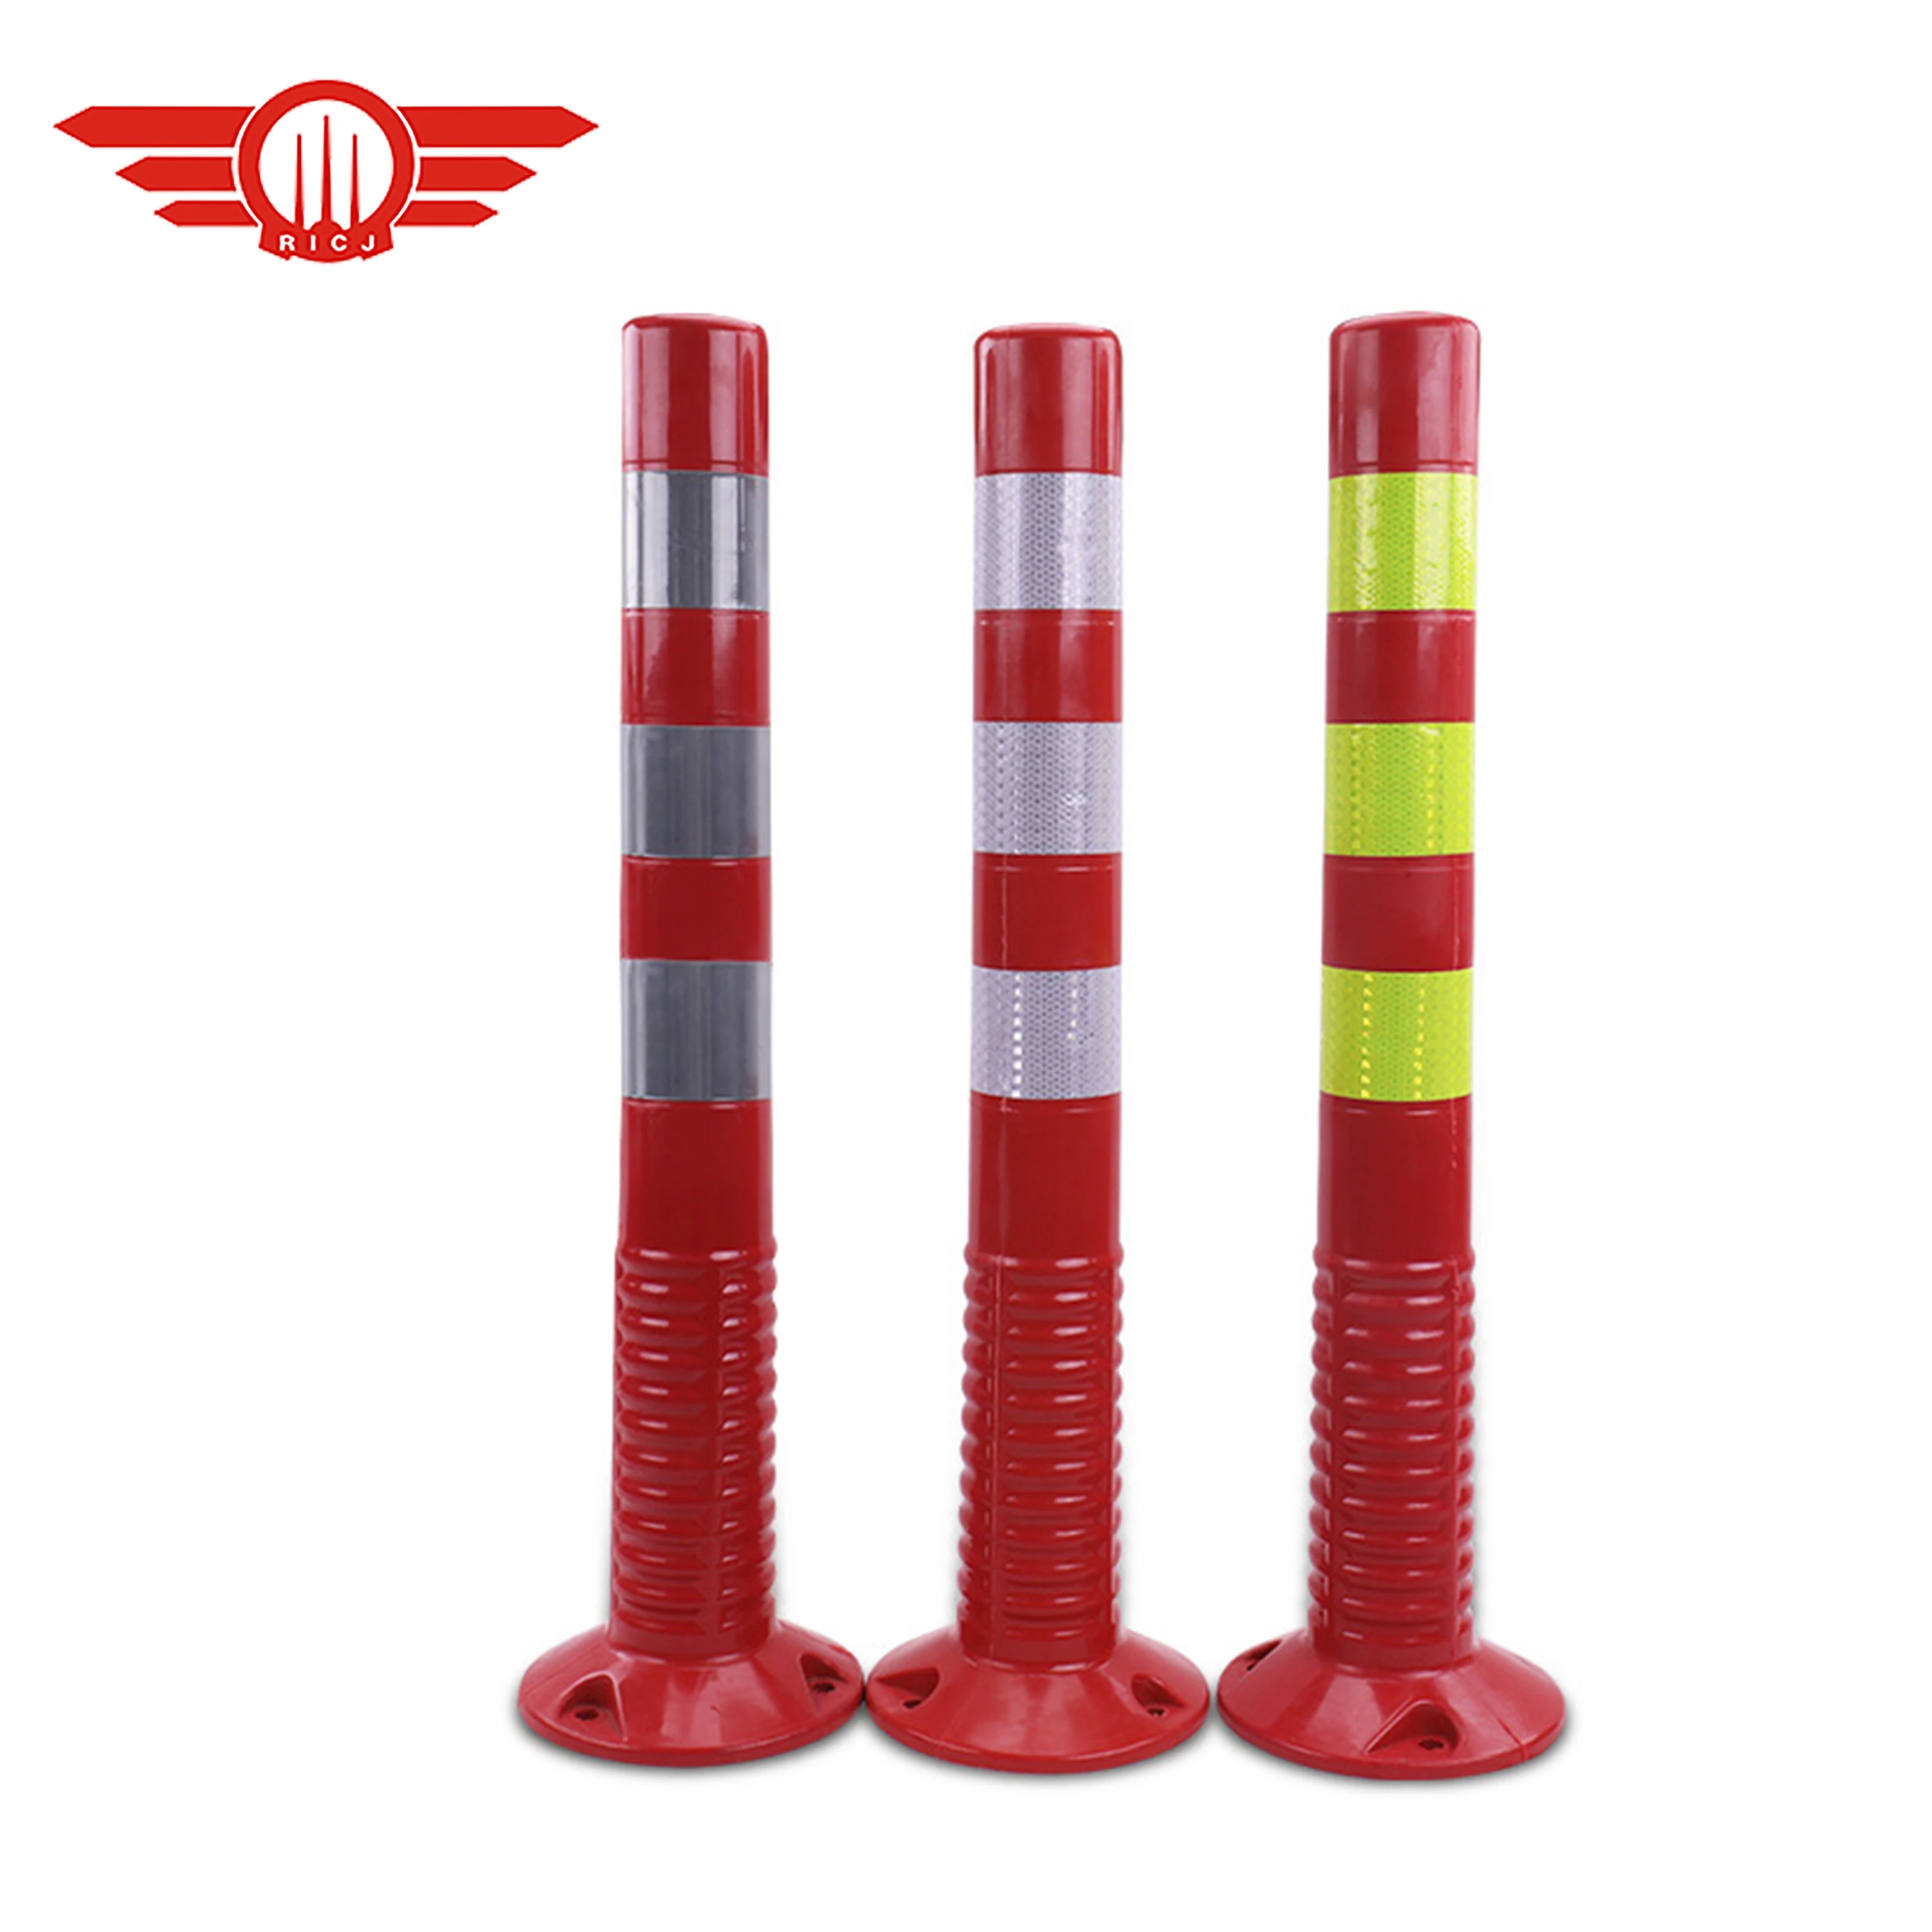 Plastic expandable road safety barrier